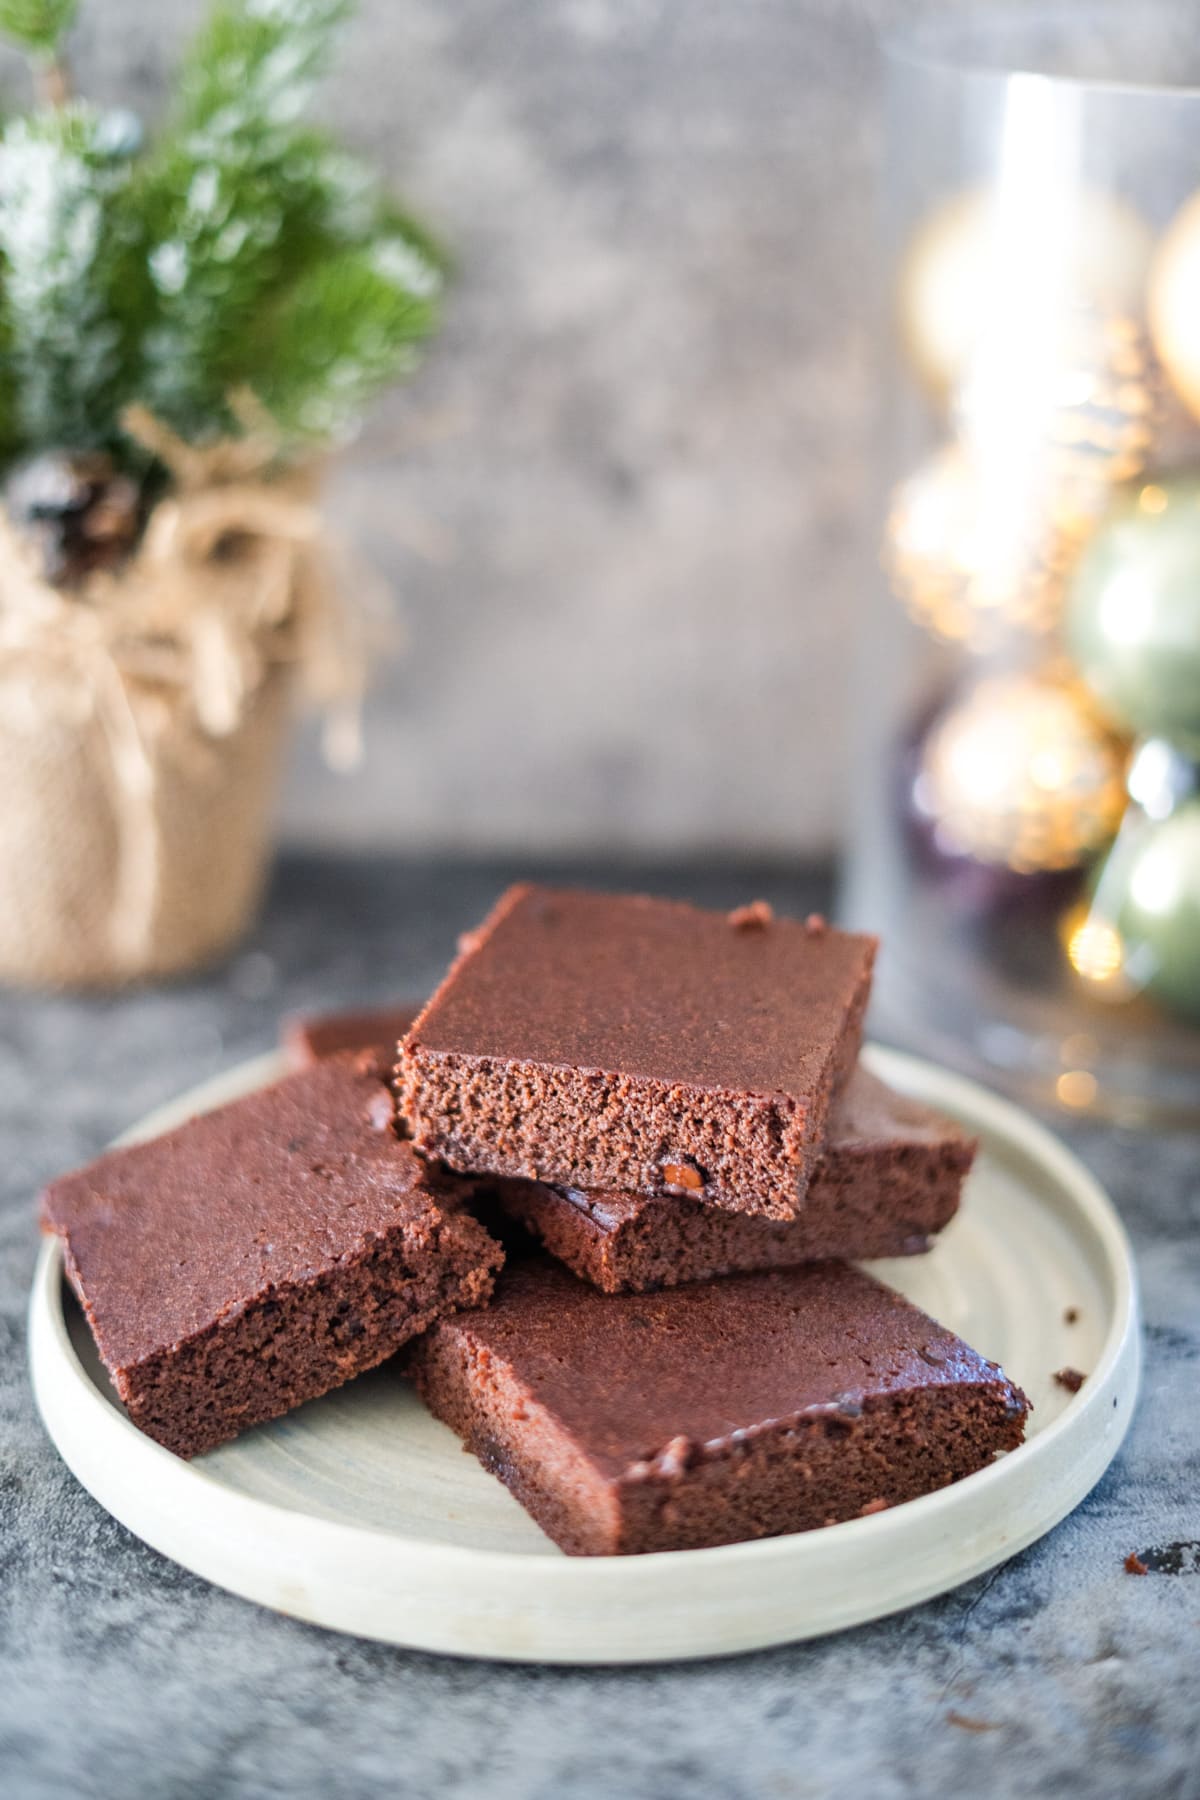 Spiced brownies on a plate in front of Christmas decorations.